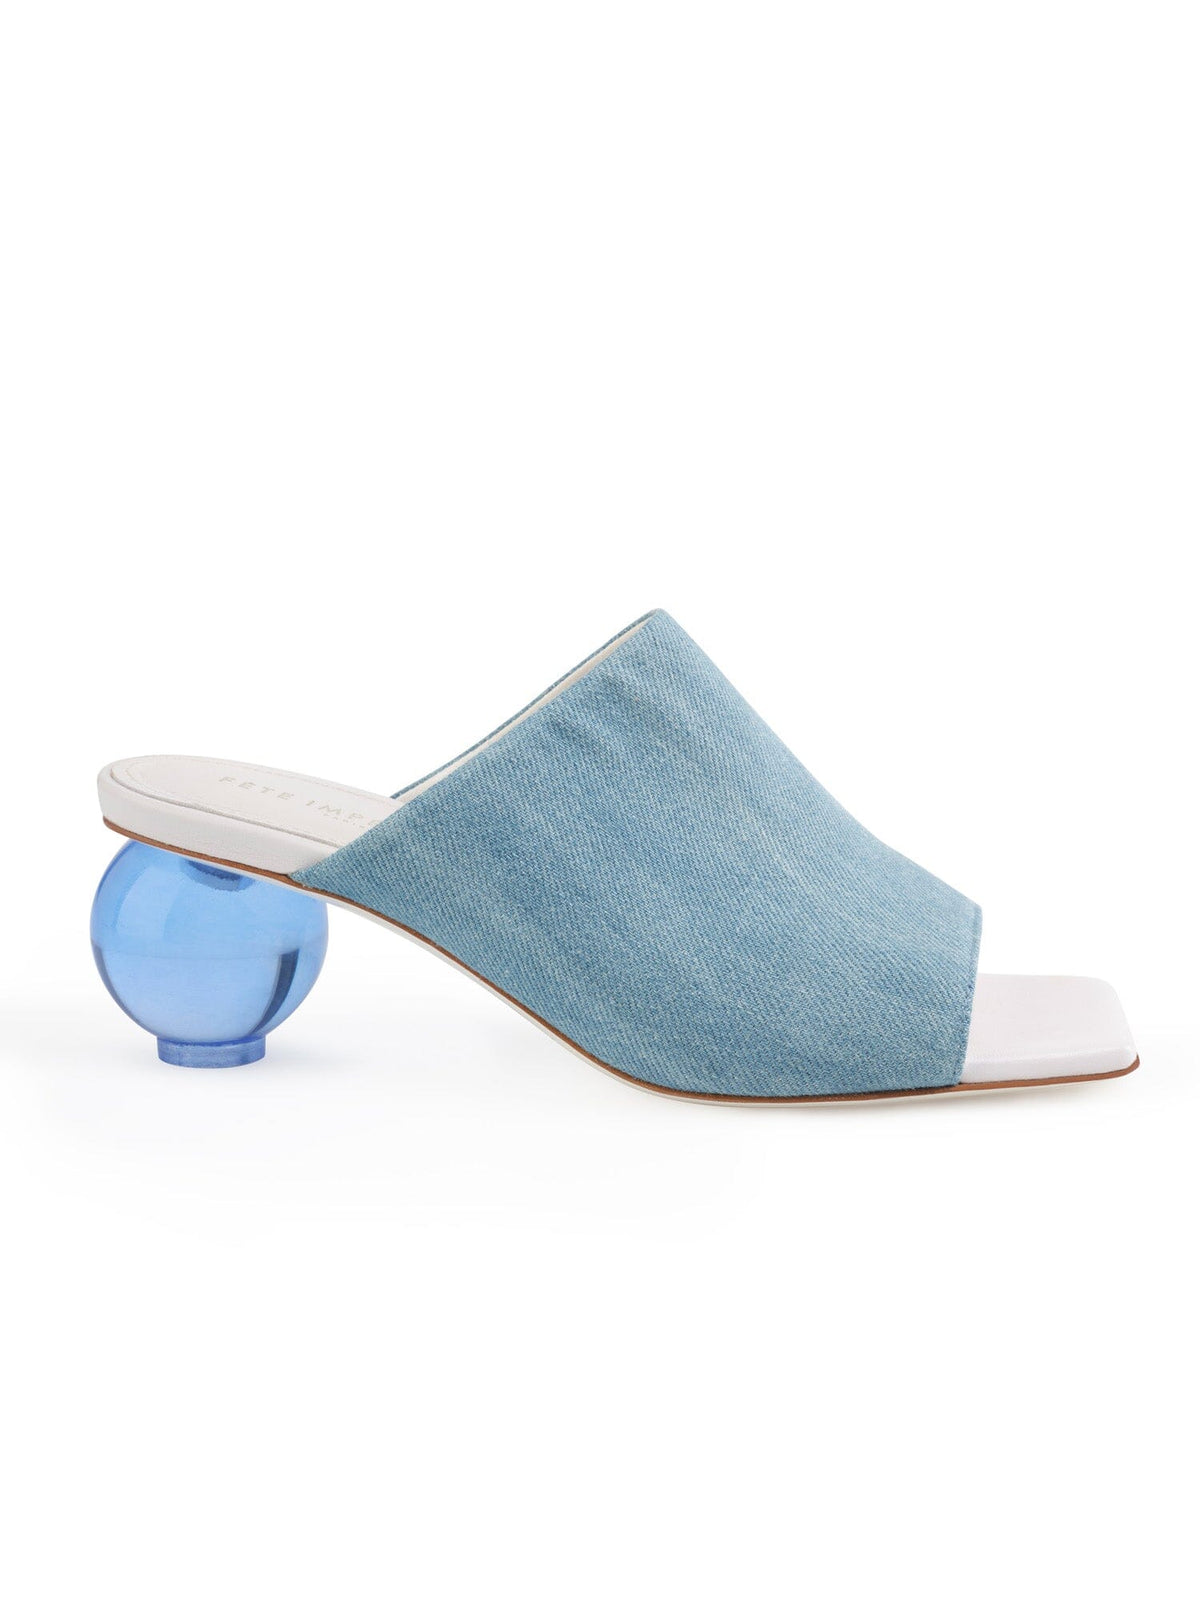 PAROS - Plexiglas mules with spherical heels and wide strap in faded denim Blue Shoes Fête Impériale